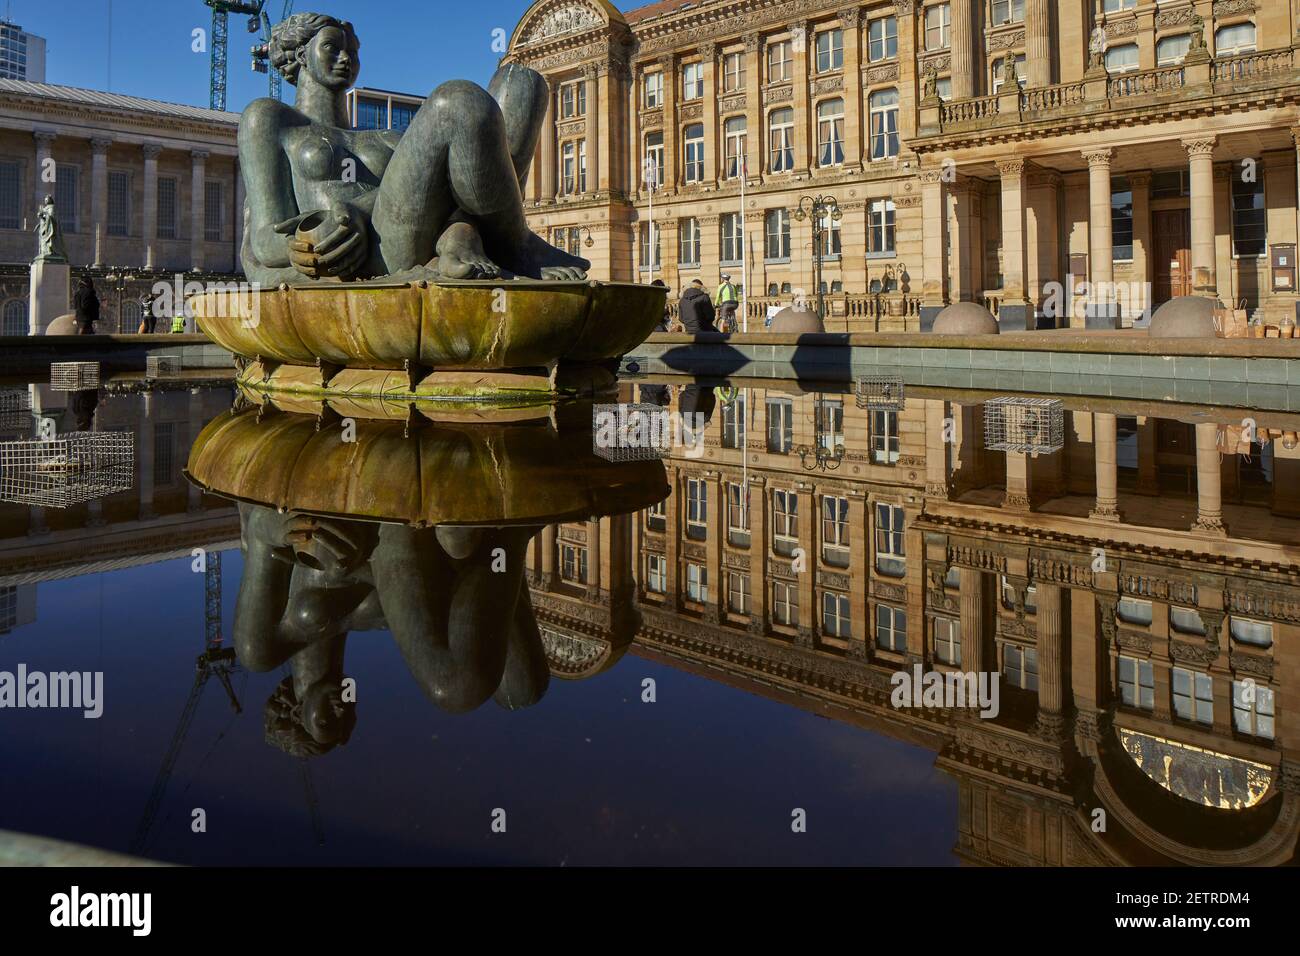 Birmingham city centre landmark Grade II* listed Council House, Victoria Square, and The River, better known as The Floozie in the Jacuzzi Stock Photo